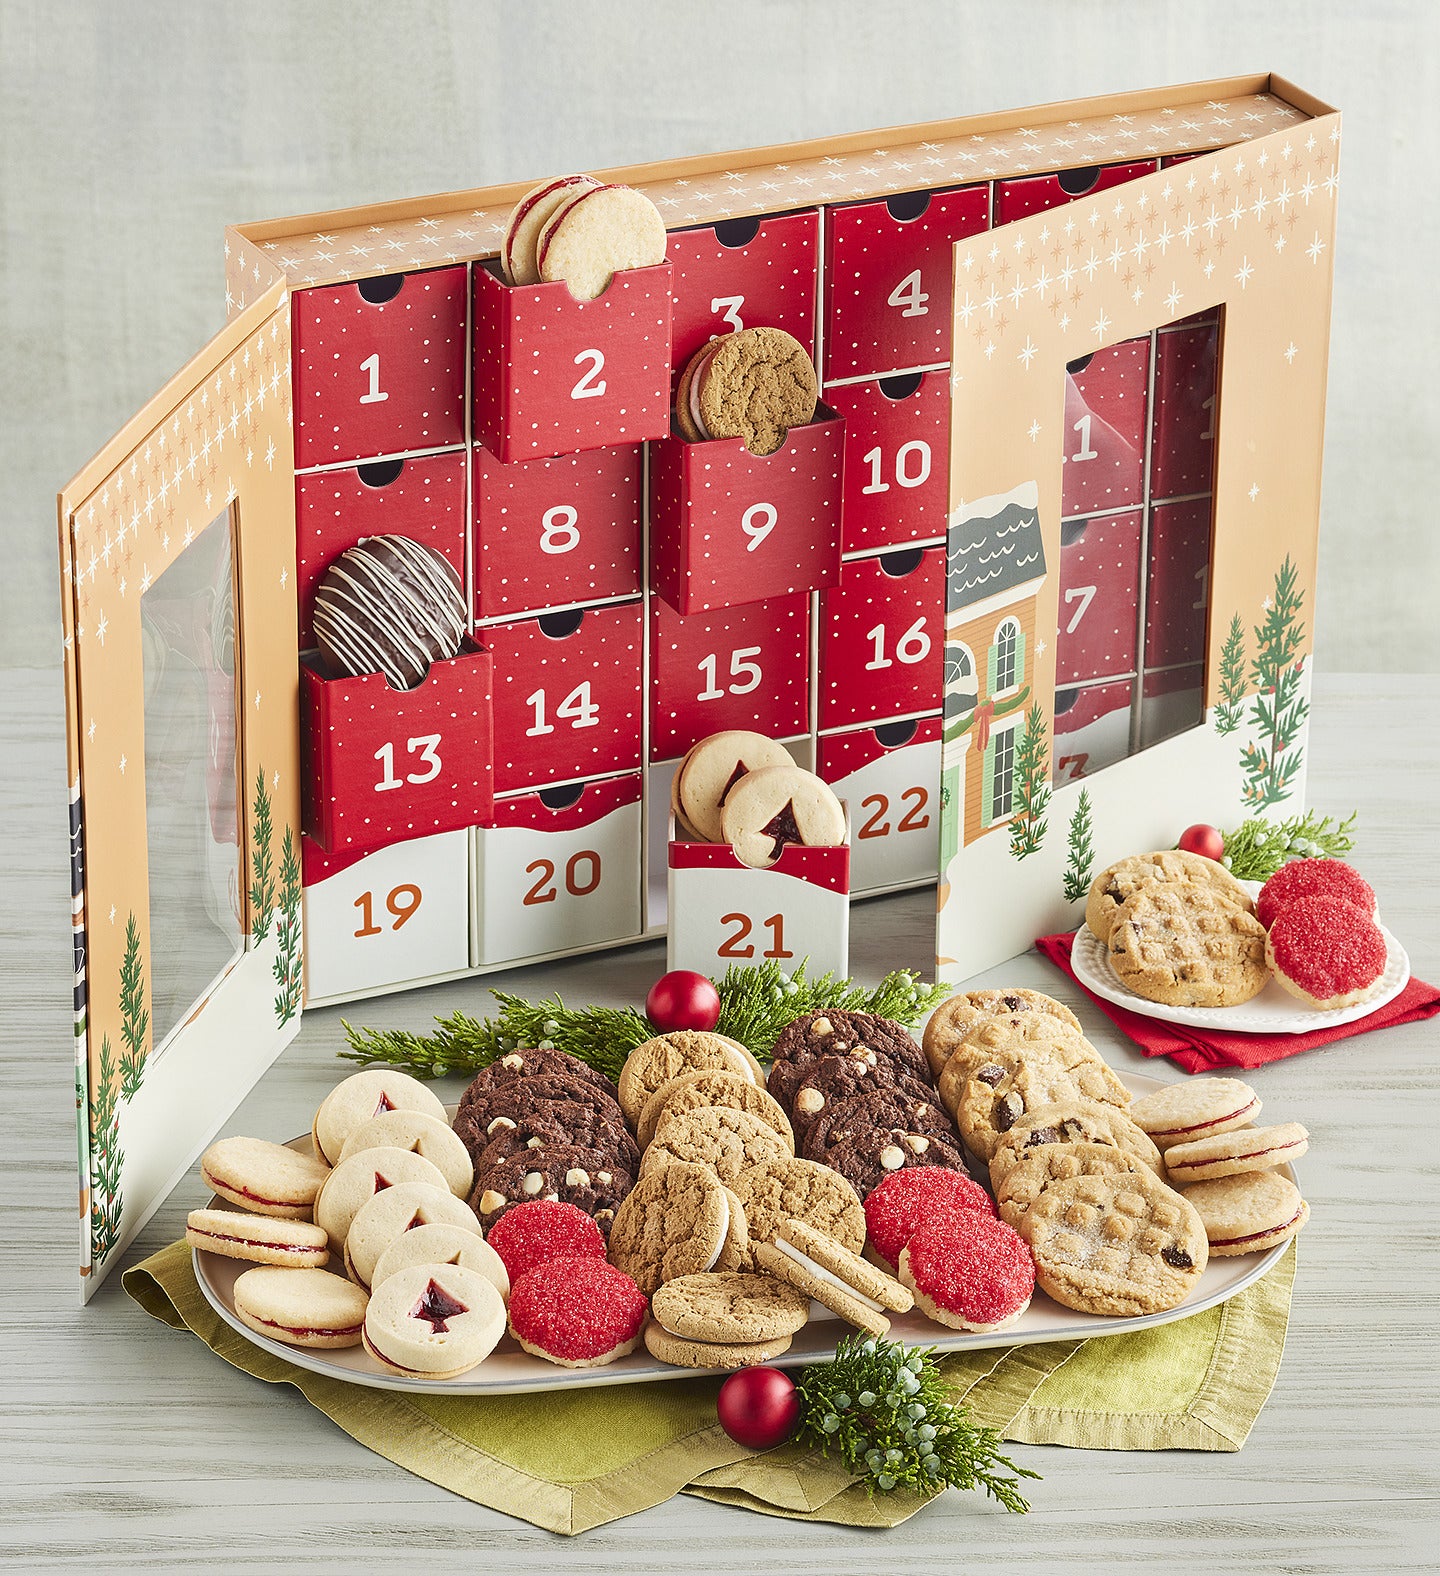 5 Best Cookie Advent Calendars Of 2022 - Top-Rated Cookie Advent Calendars